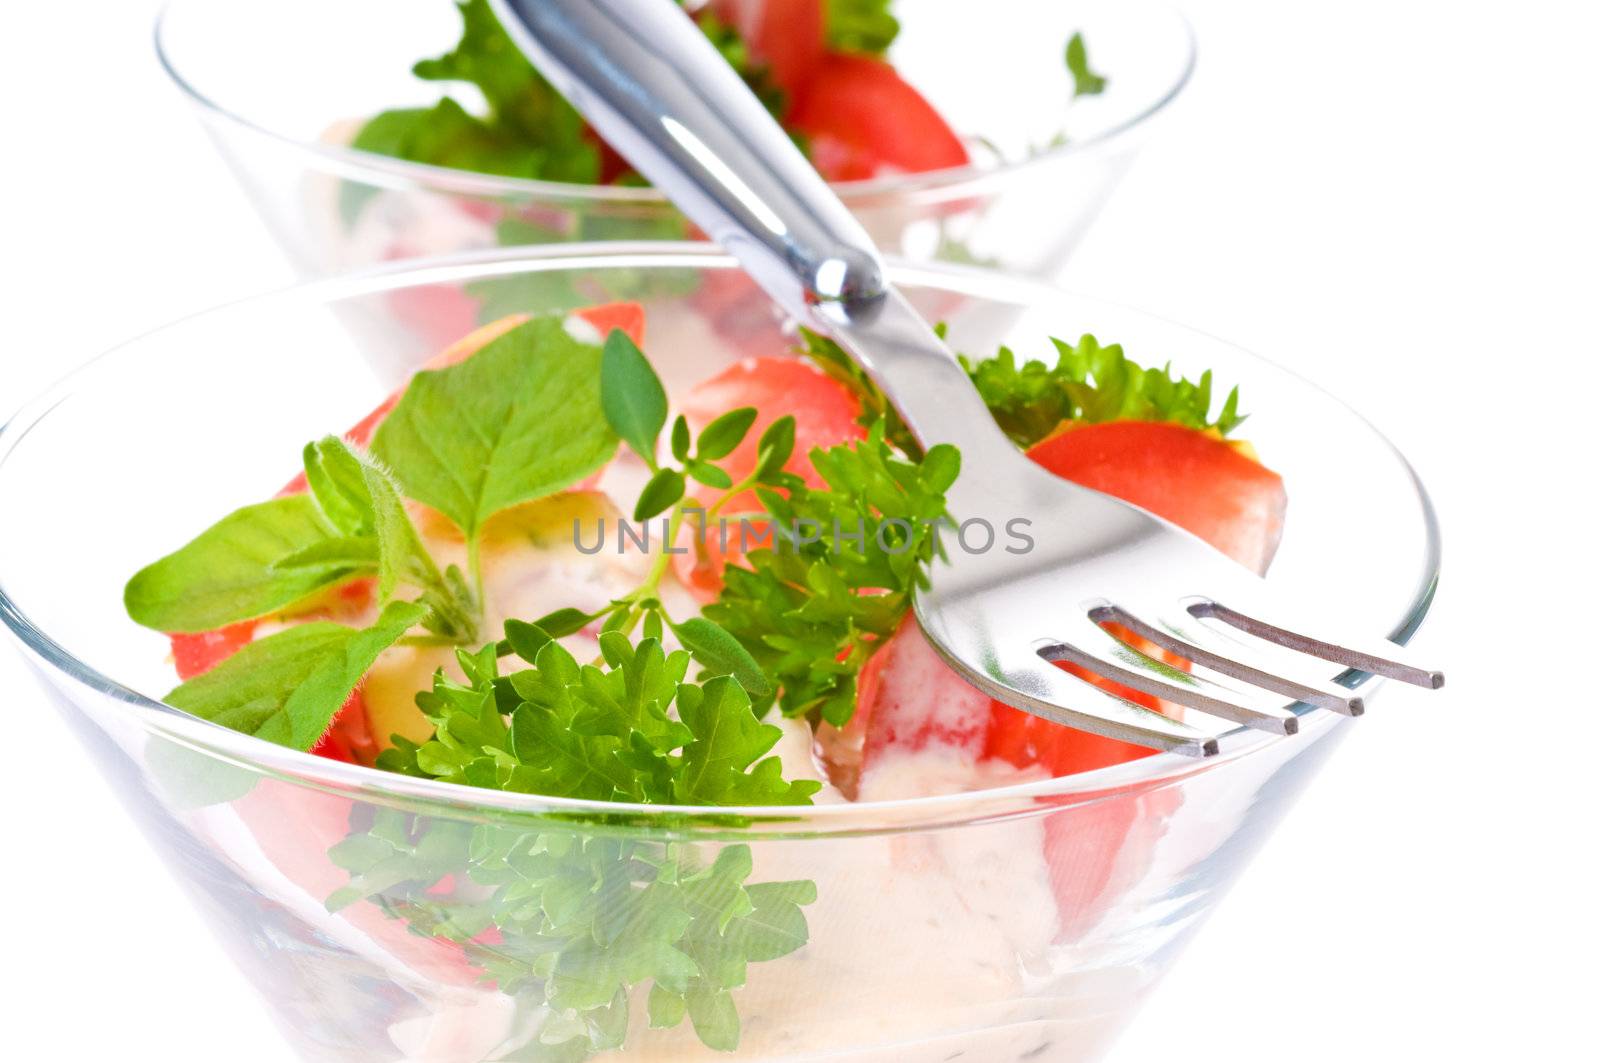 Delicious salad topped with a variety of fresh herbs.